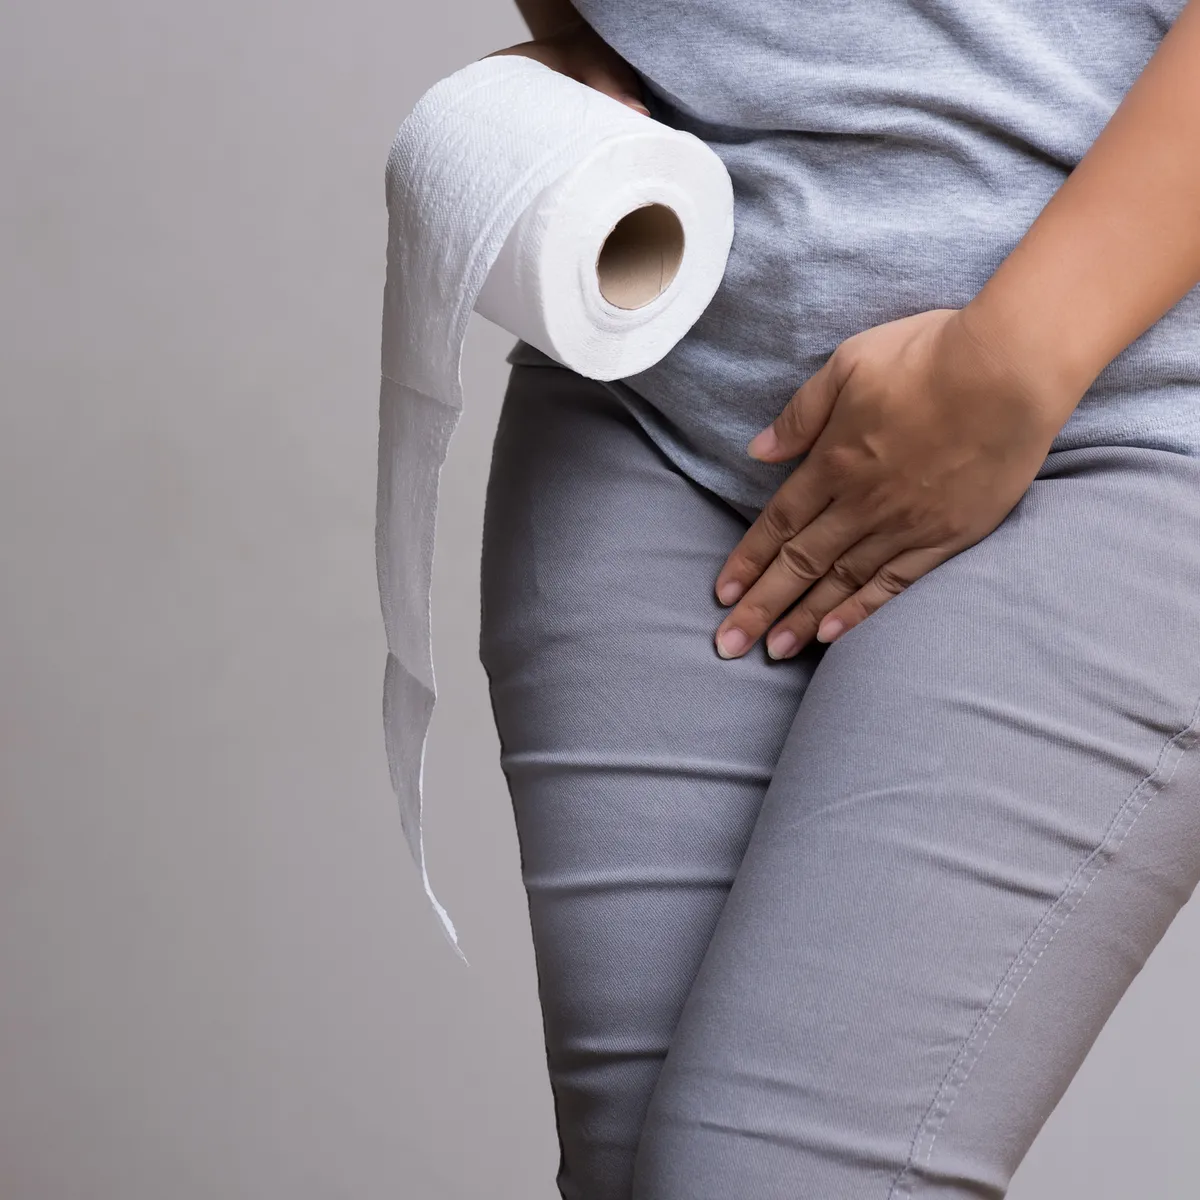 Different Types of Urinary Incontinence